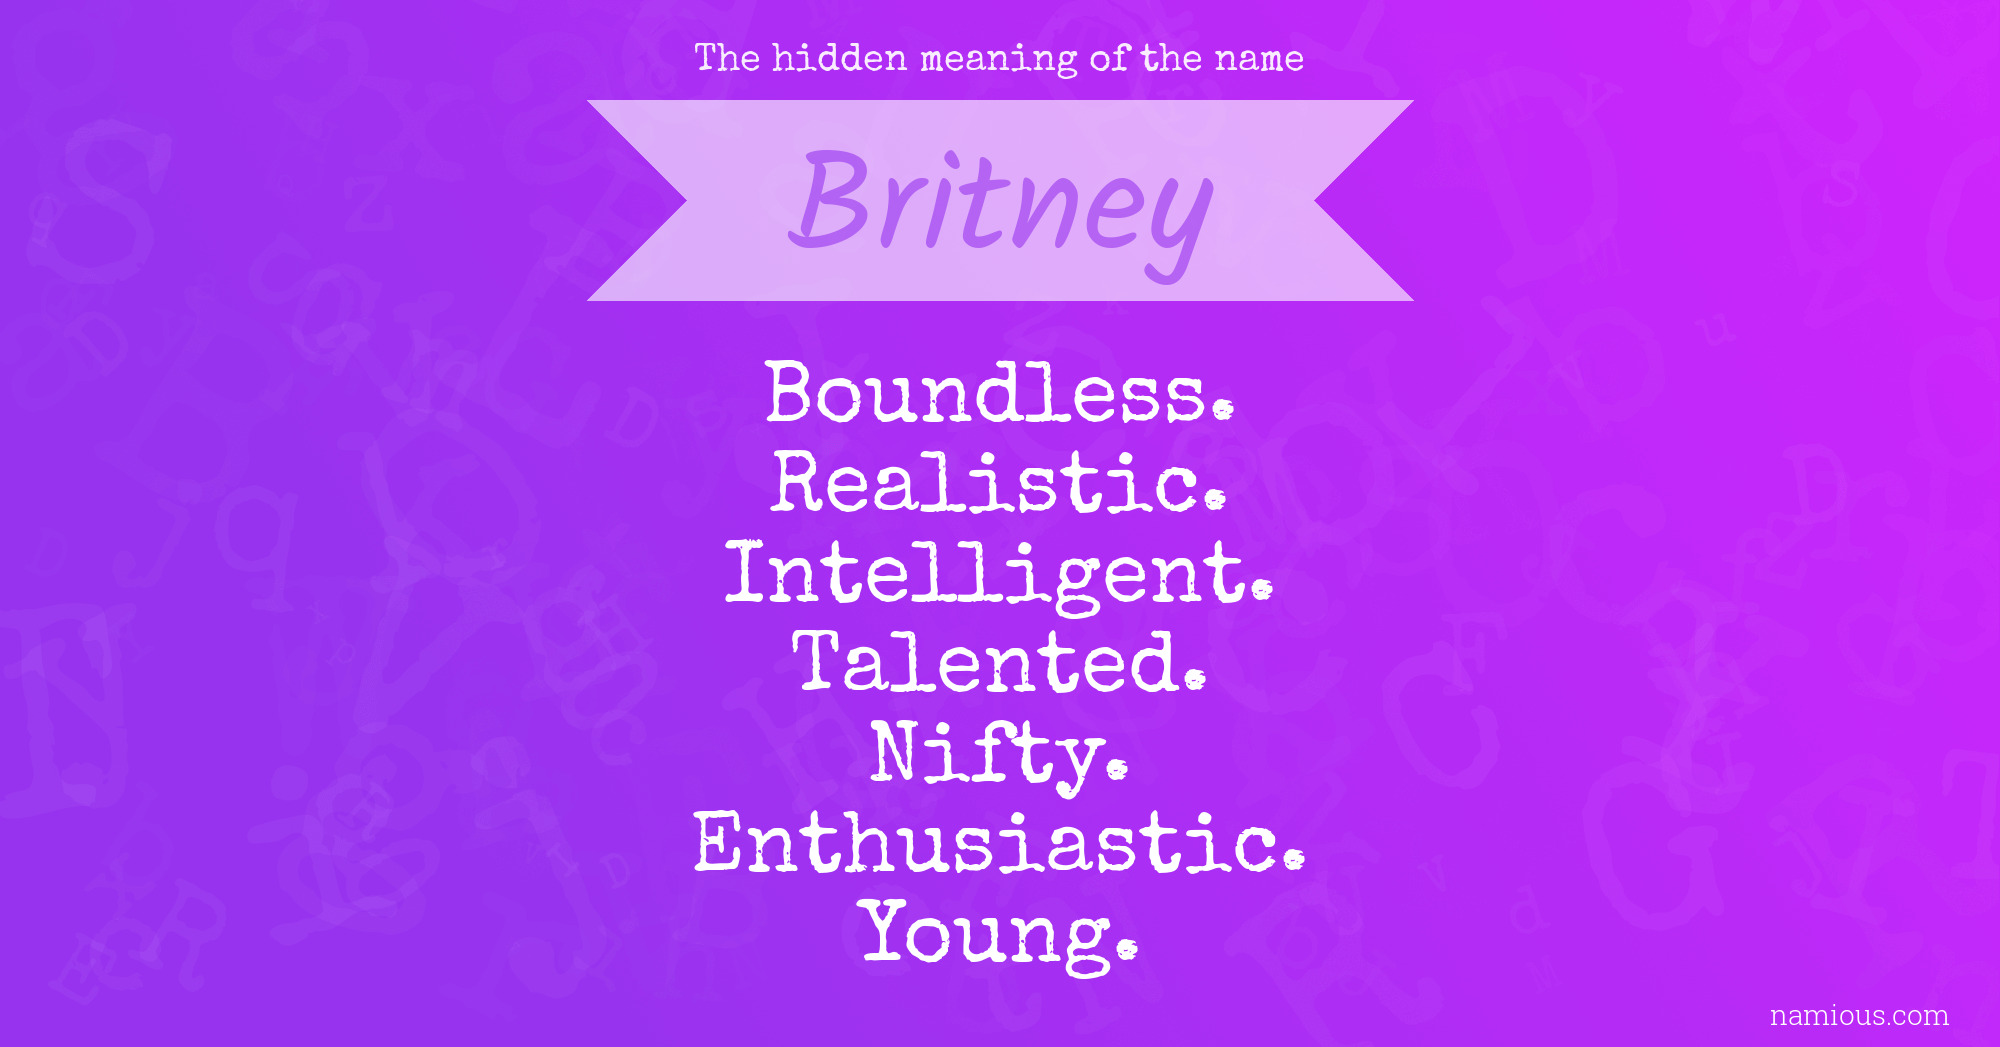 The hidden meaning of the name Britney